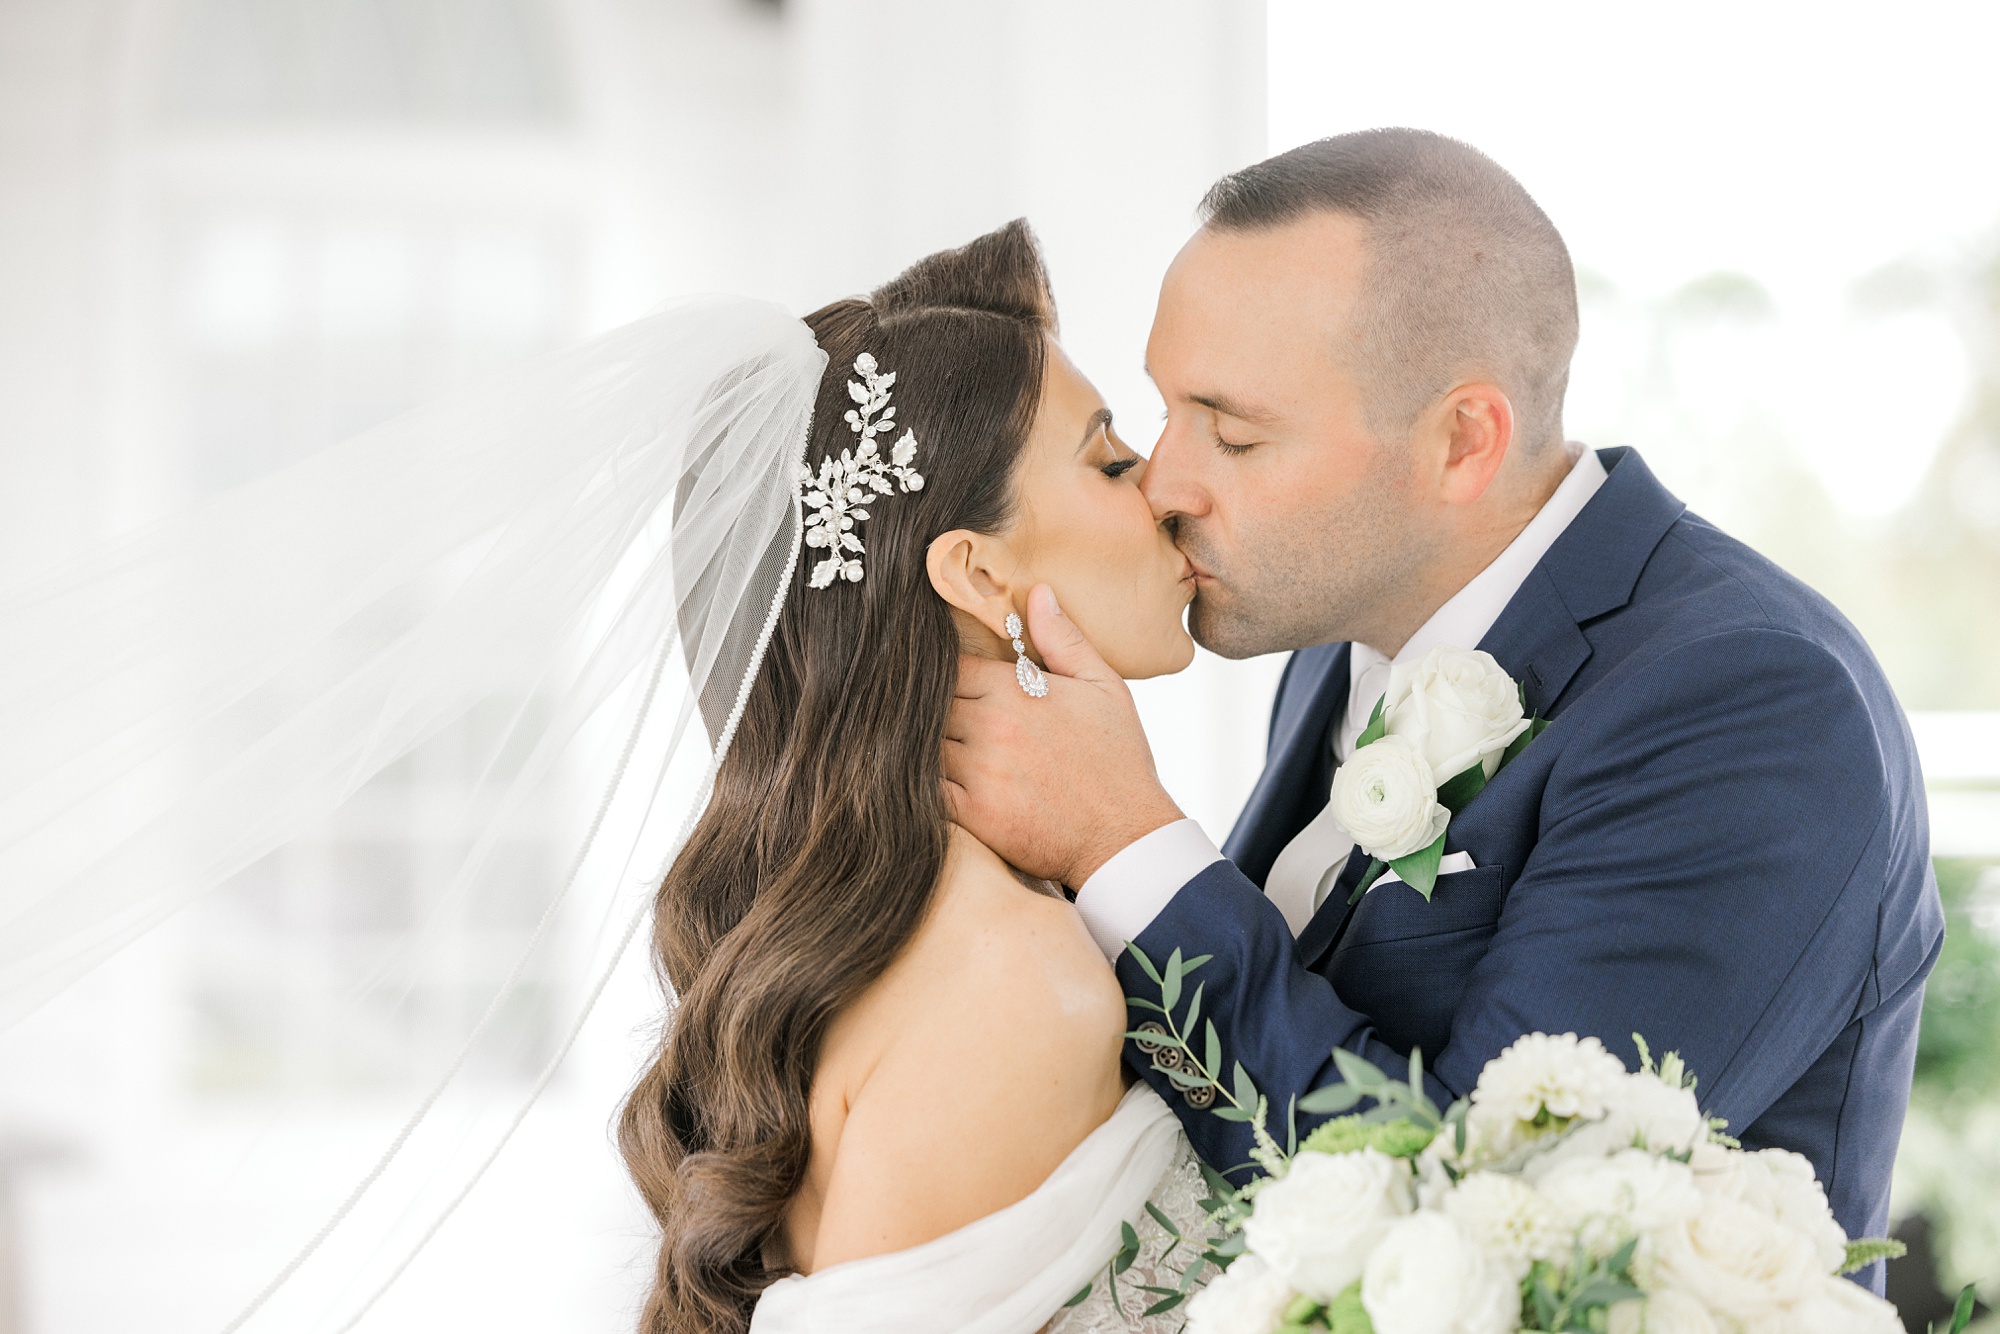 groom in navy suit leans to kiss bride with veil floating behind them